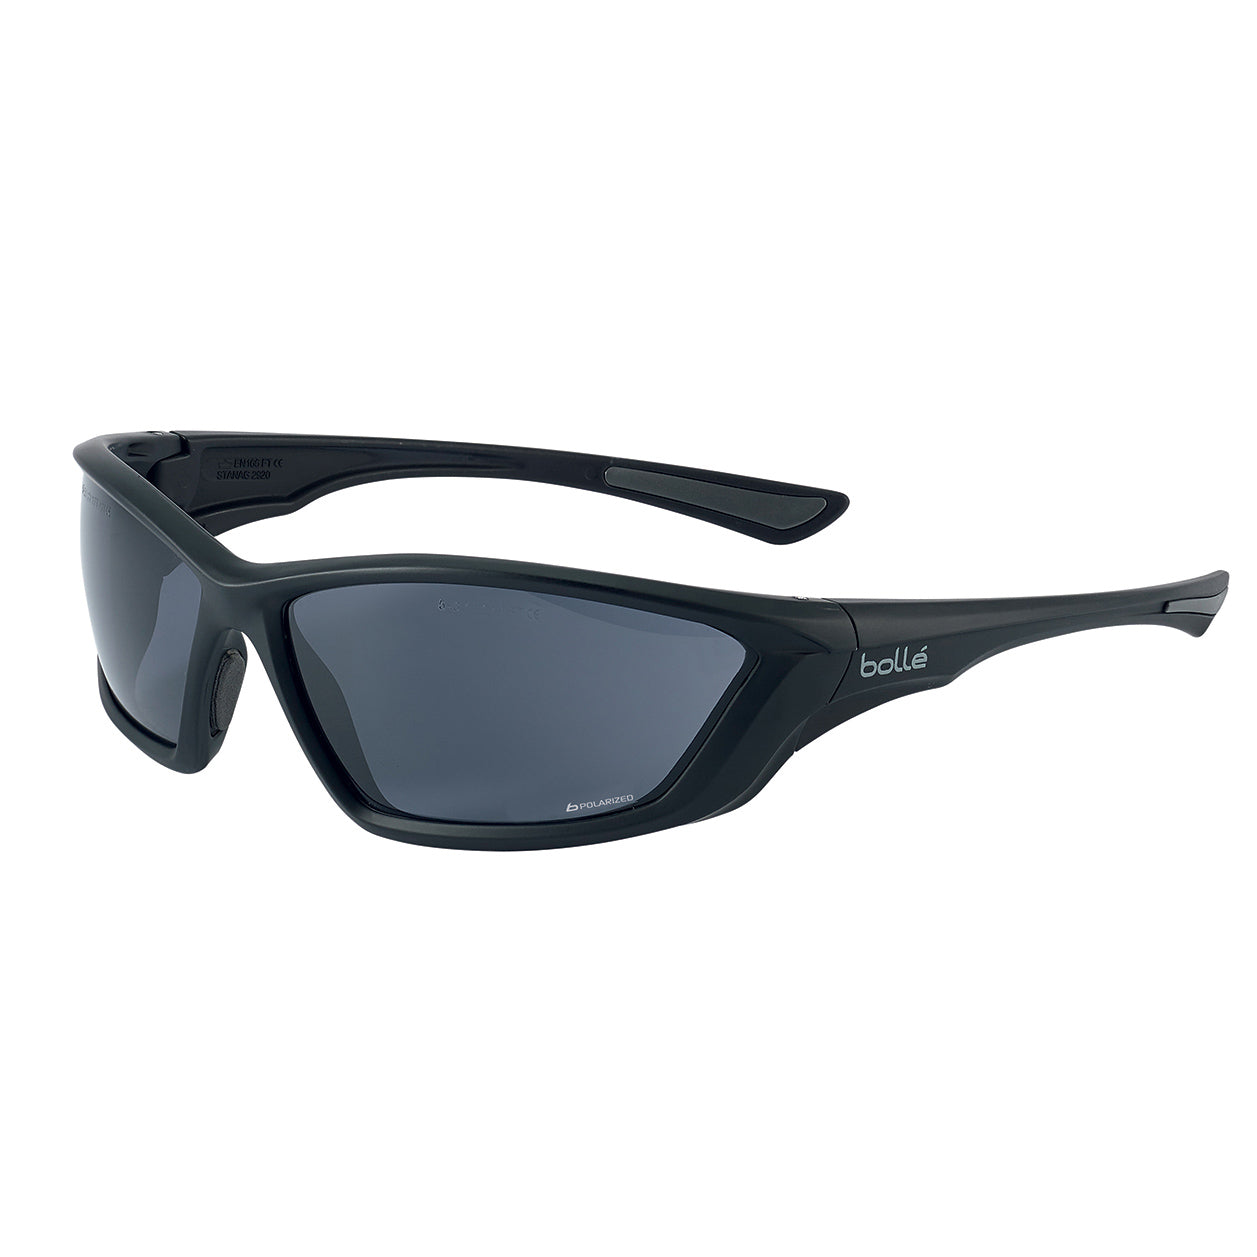 Bolle SWAT SWATPOL Tactical Ballistic Sunglasses with Polarized Lens